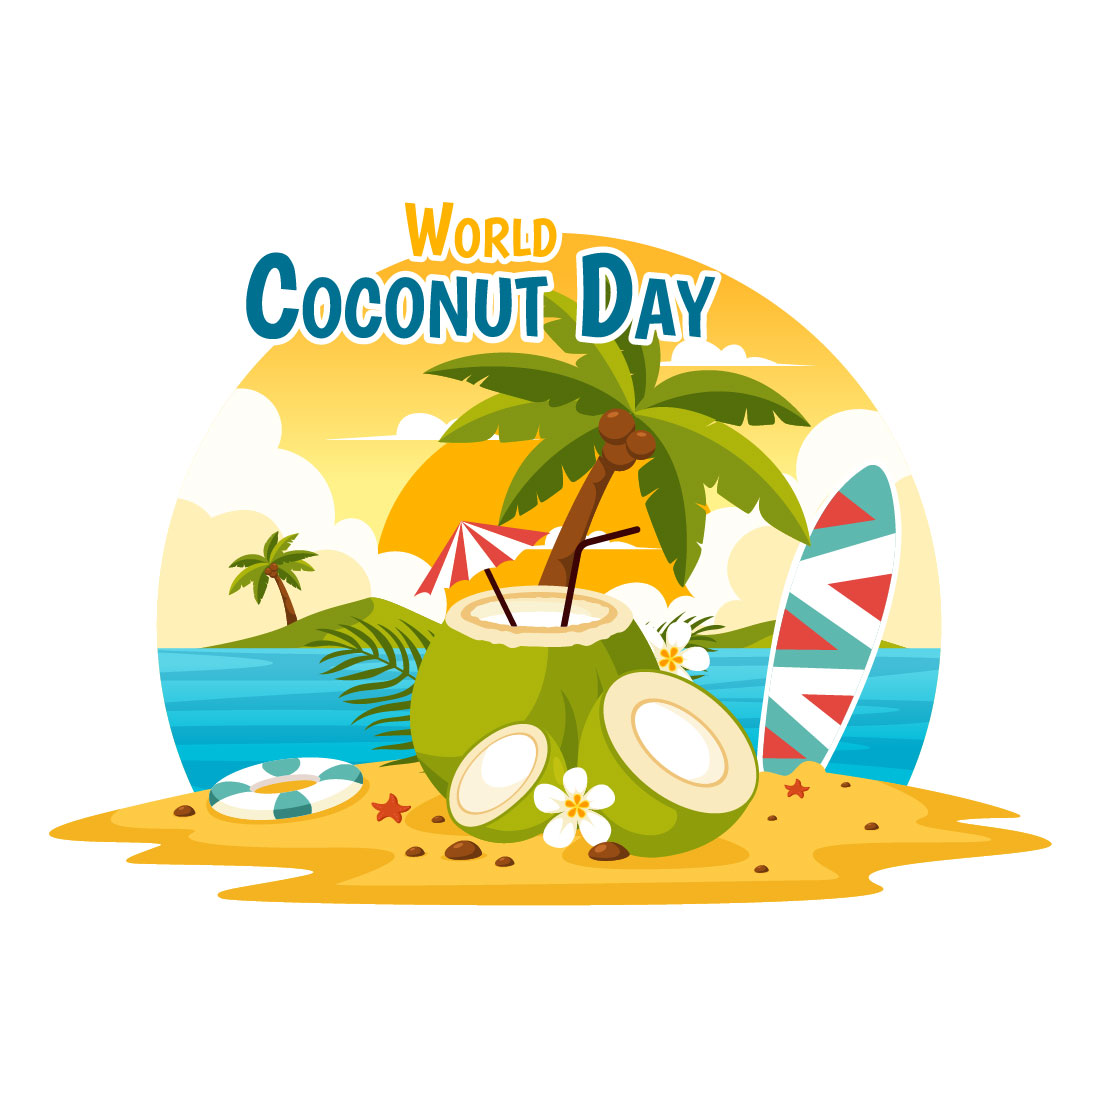 10 World Coconut Day Illustration cover image.